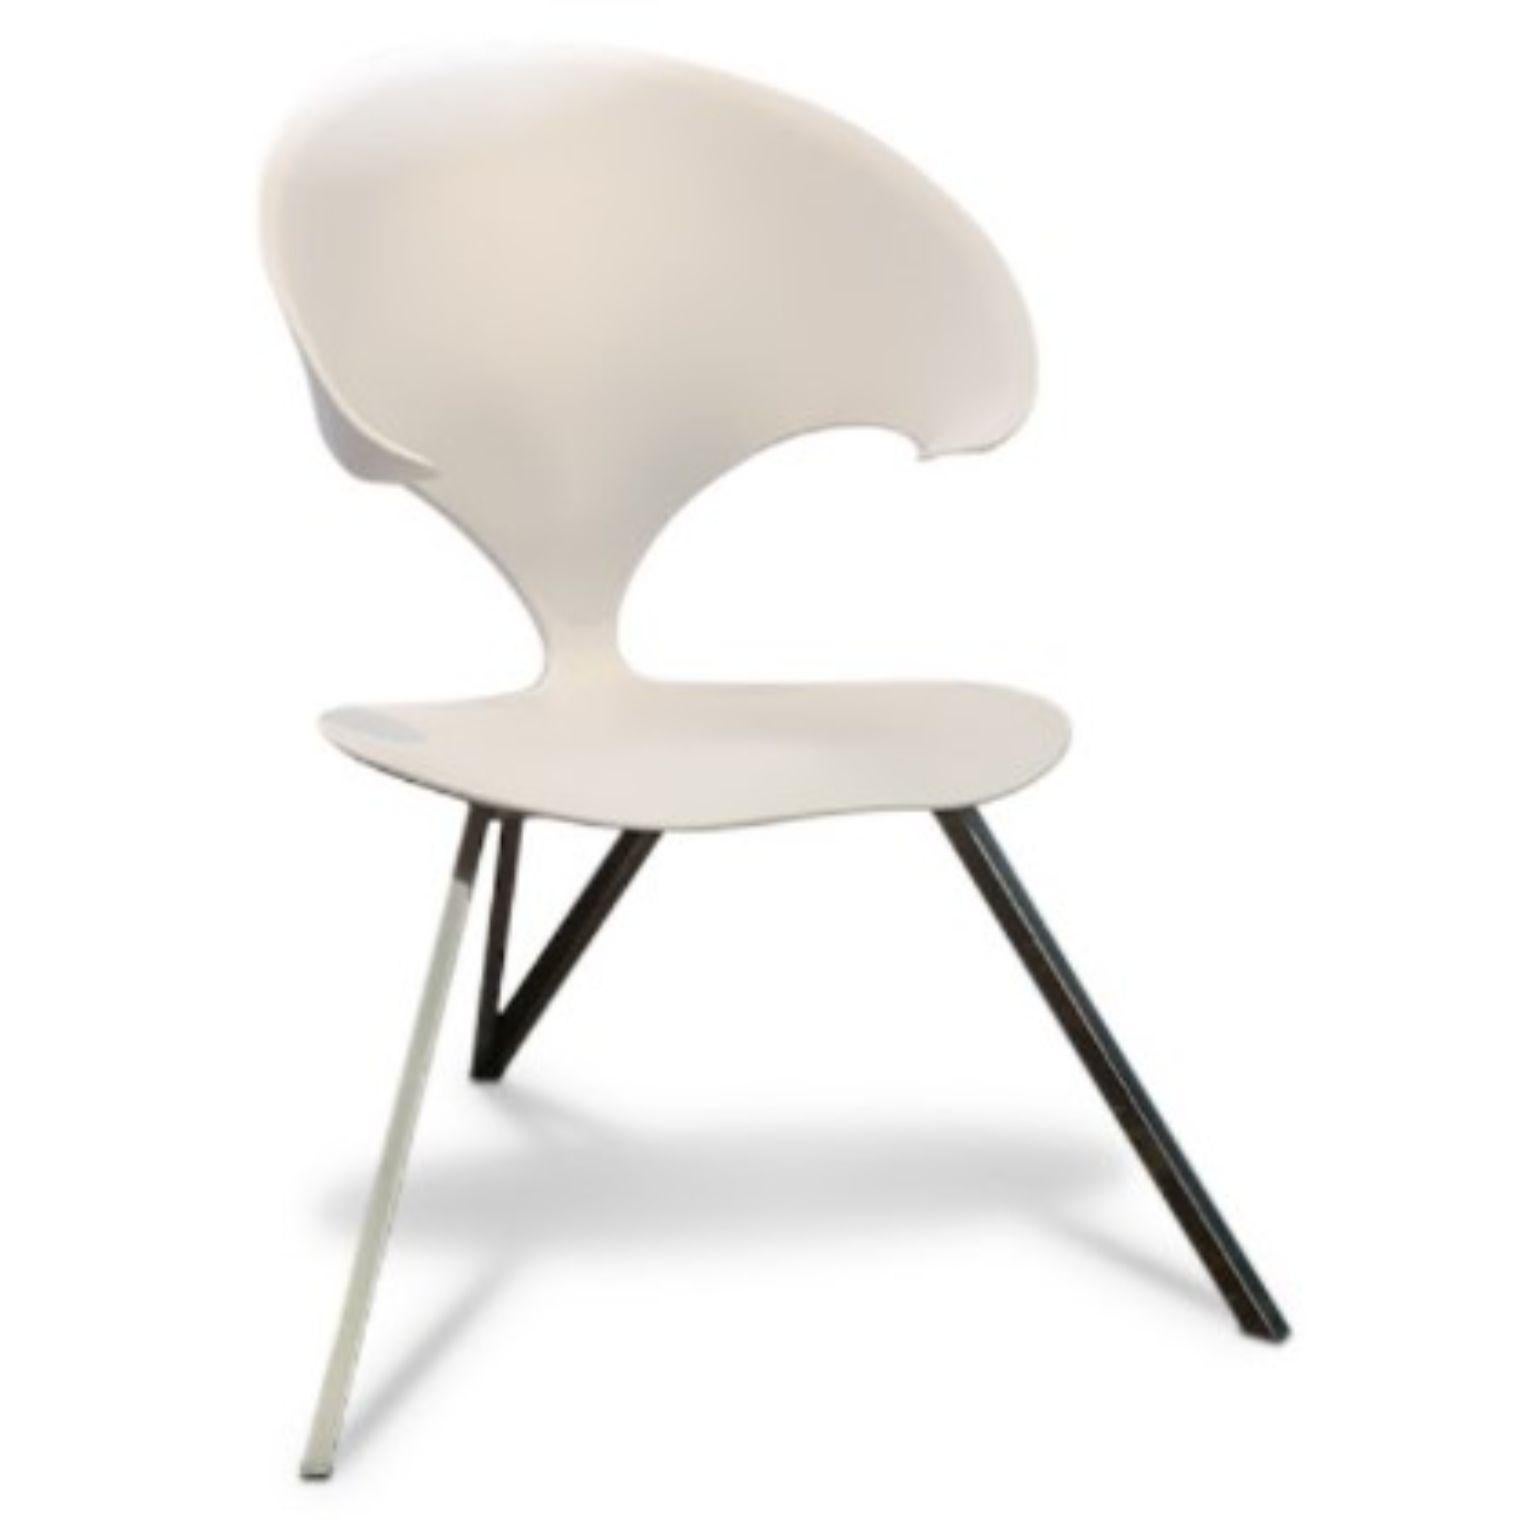 Hedonê chair by Mameluca
Material: Corian, Stainless steel
Dimensions: D65 x W85 x H95 cm

The anatomical and physiological studies allowed the discovery that the clitoris was not only richer in nerve endings but also more vascularised, making